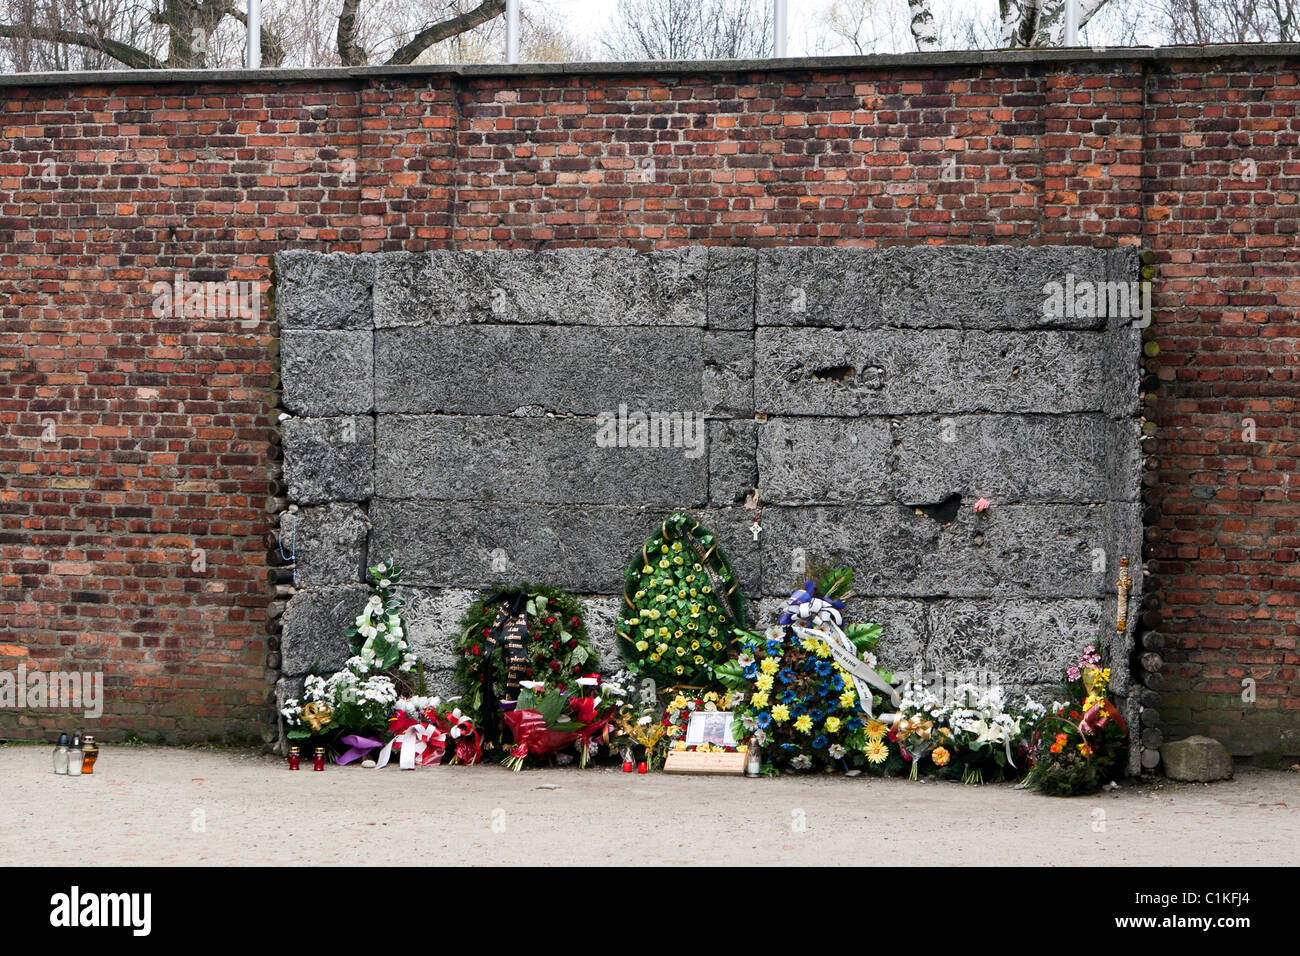 Execution wall used by firing squads at Auschwitz-Birkenau concentration camp, Poland. Stock Photo